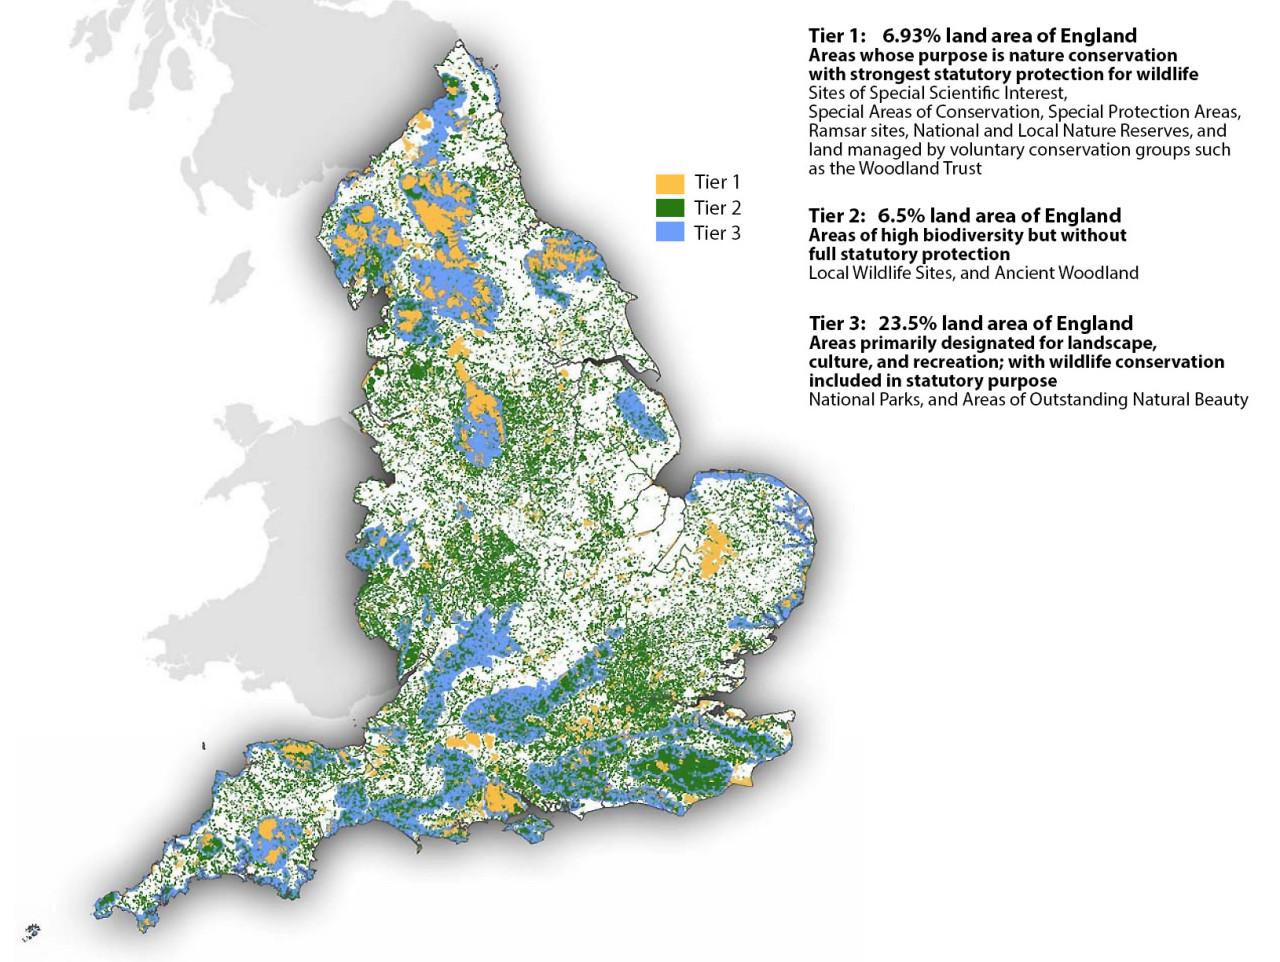 mapsontheweb:
“ Wildlife Conservation in England: the three tiers of protection for wildlife.
”